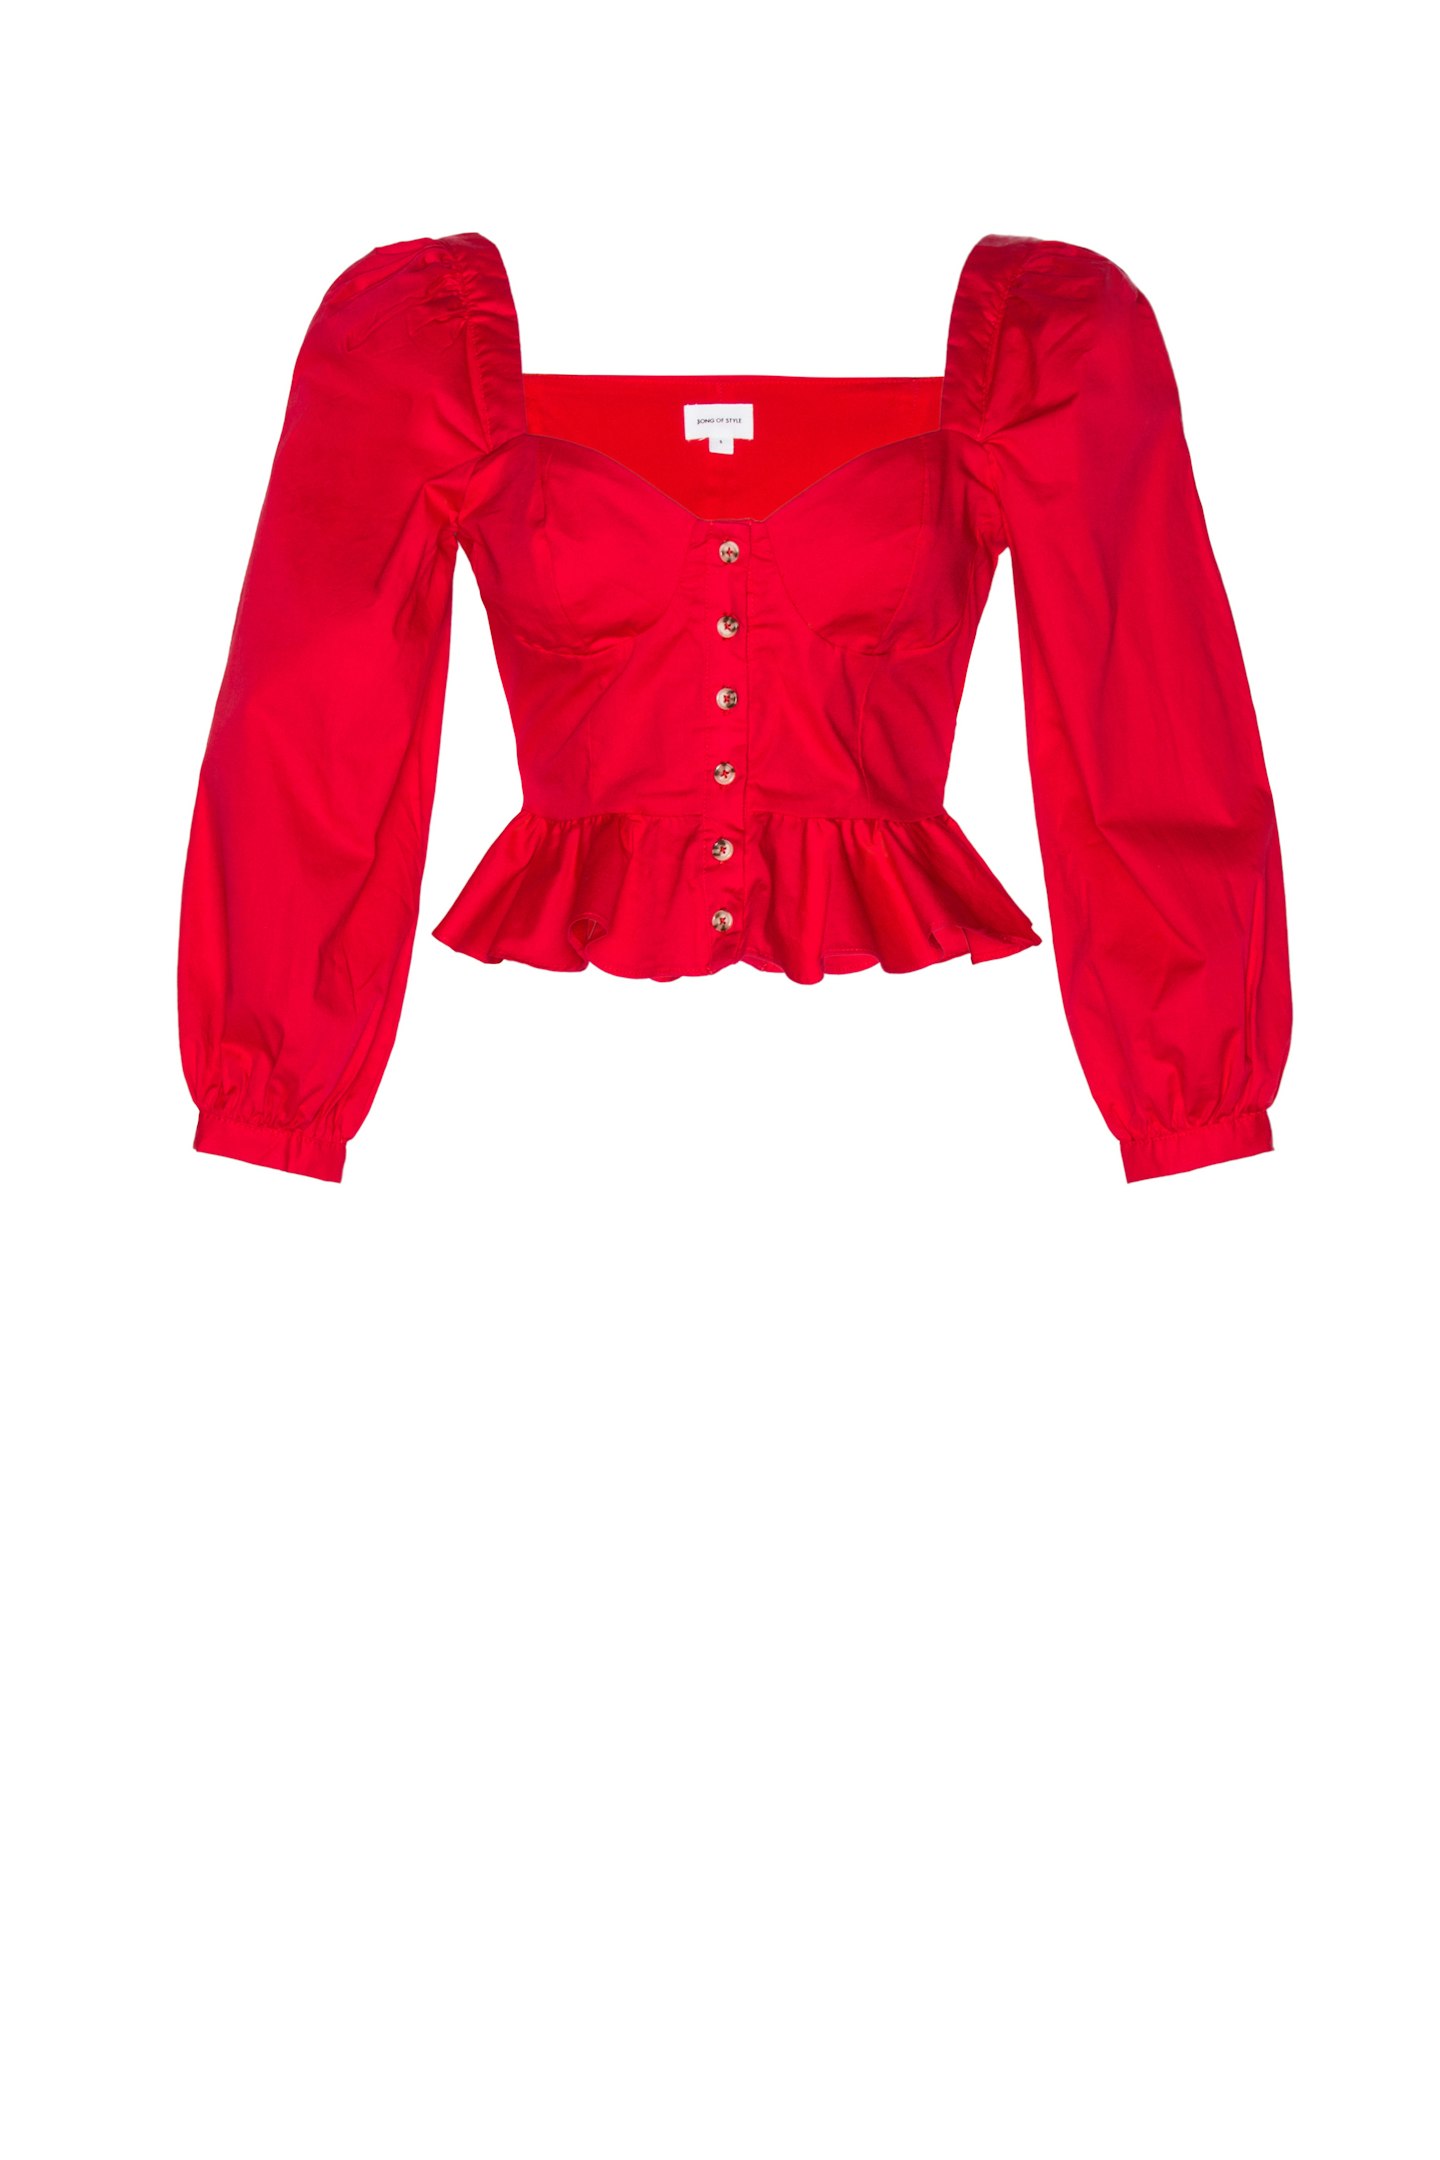 aimee song revolve red blouse